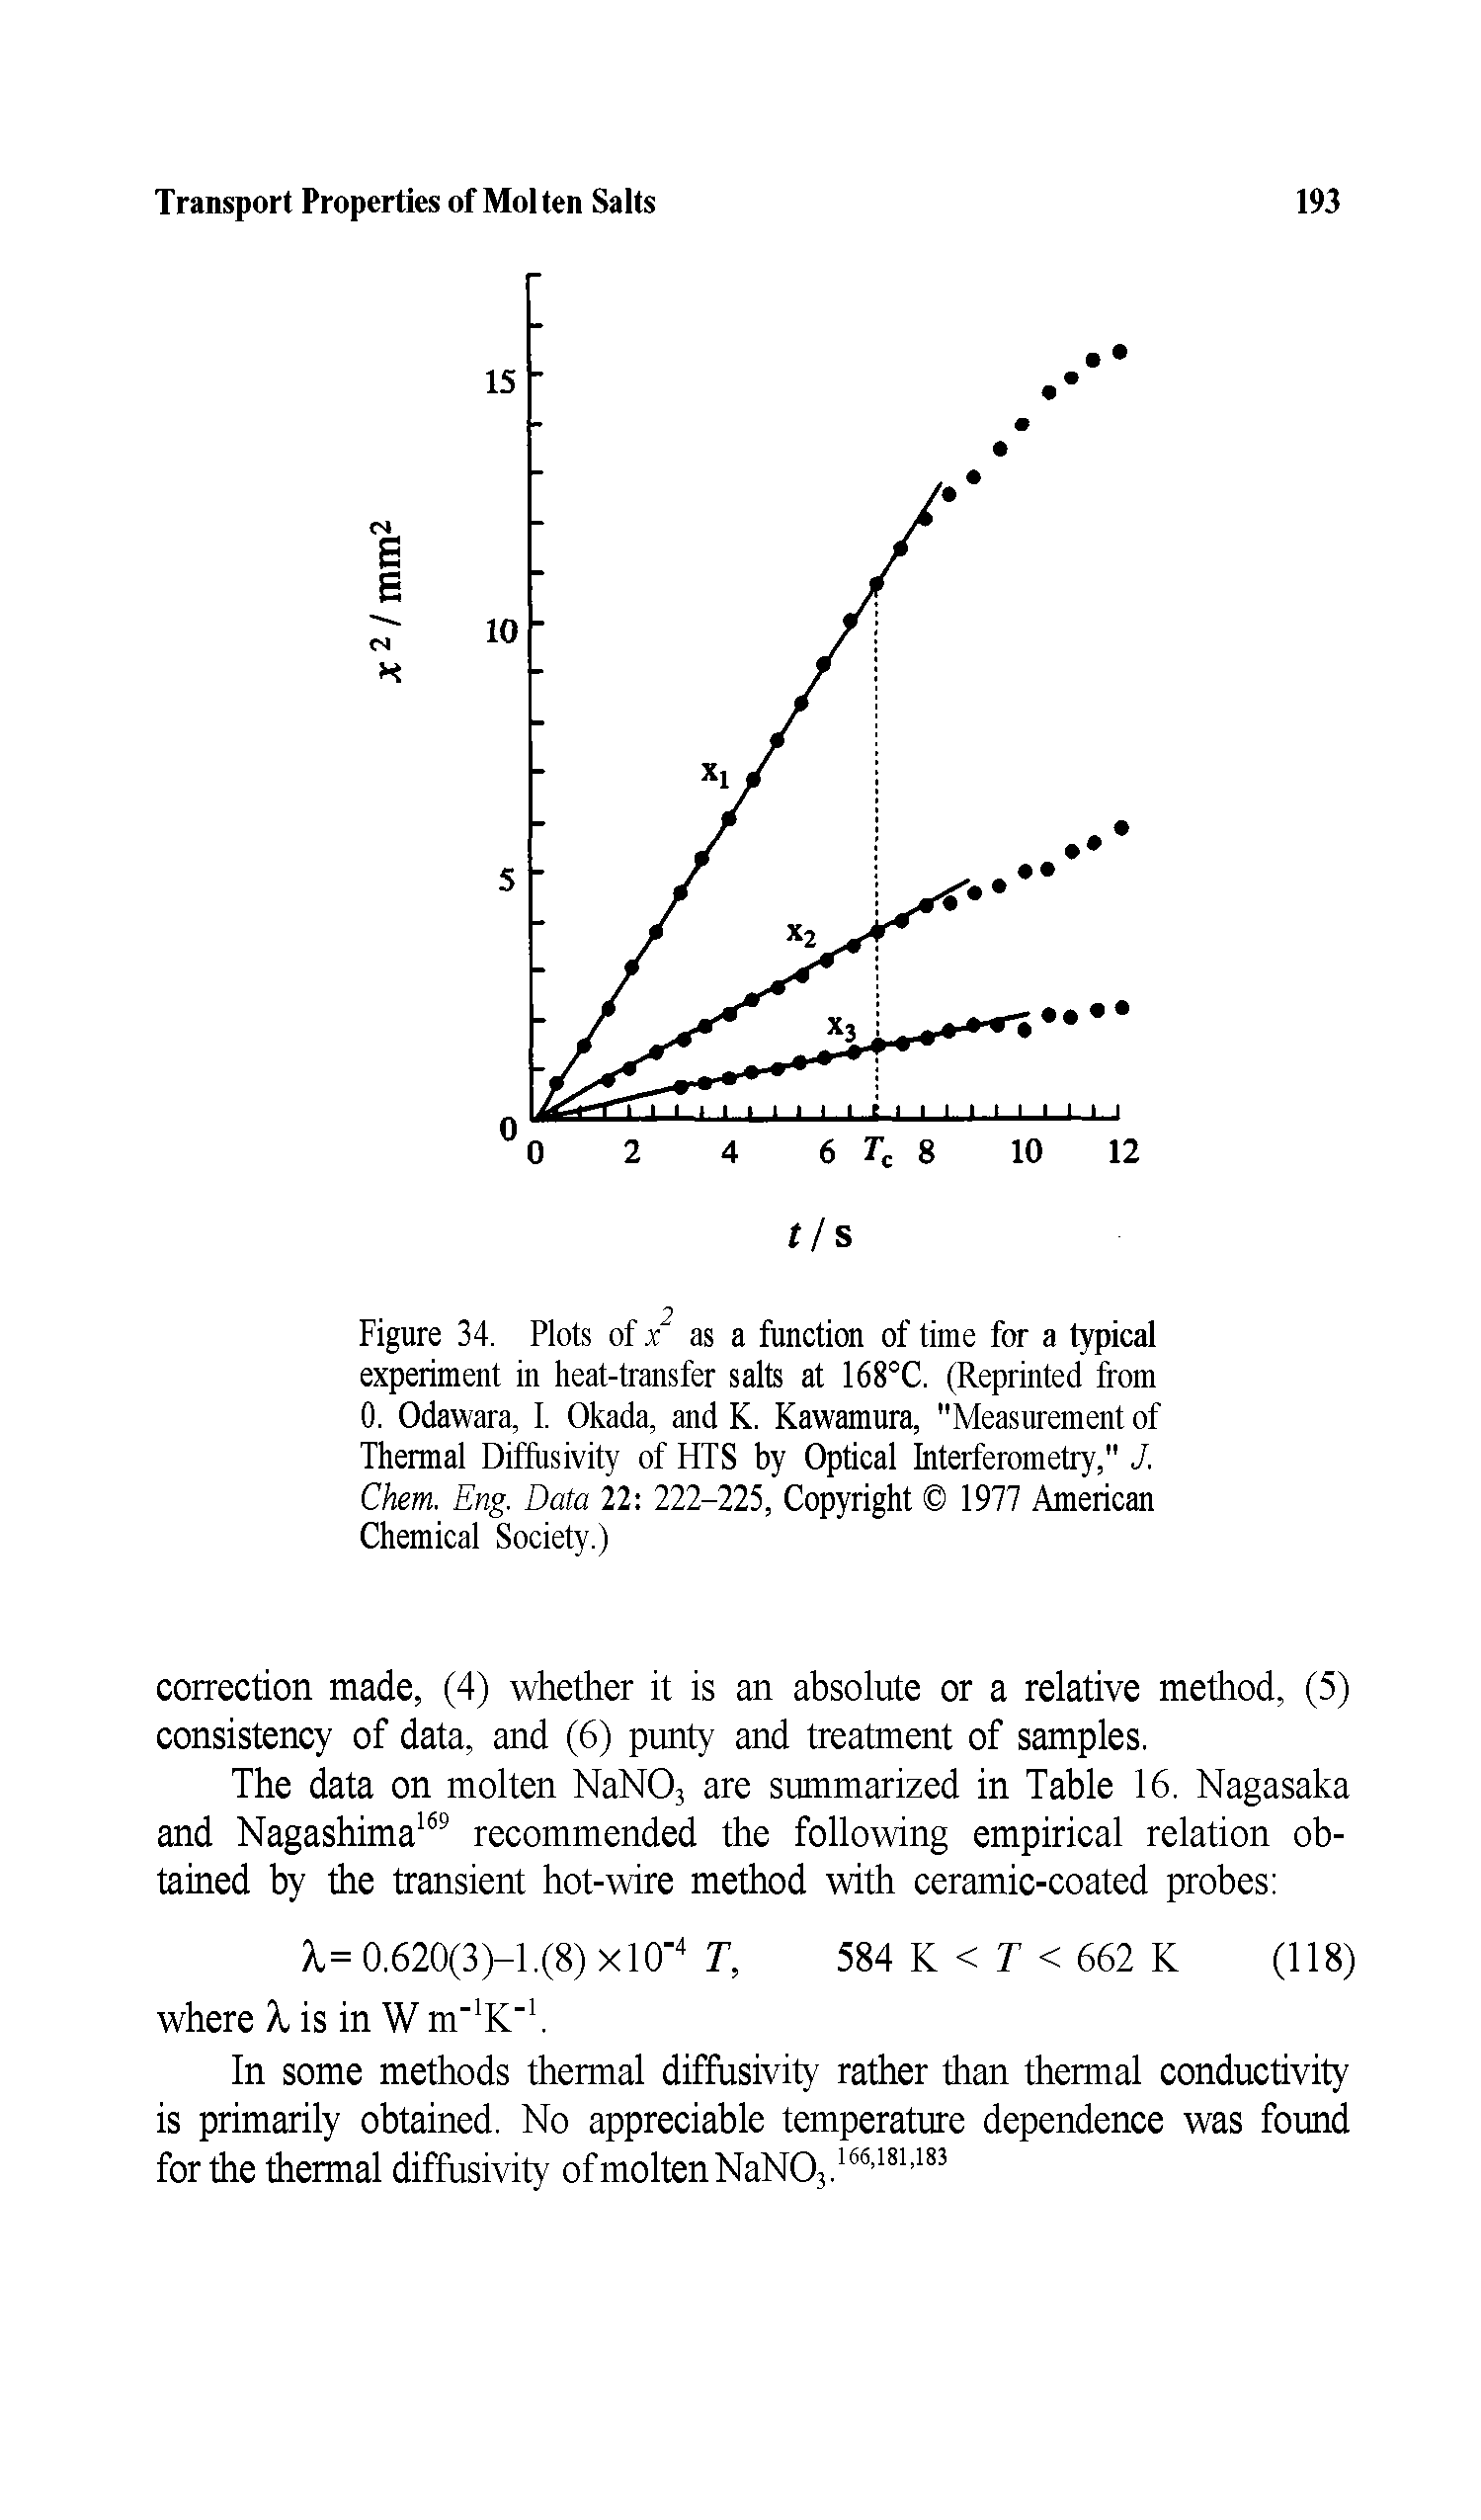 Figure 34. Plots of x as a function of time for a typical experiment in heat-transfer salts at 168°C. (Reprinted from 0. Odawara, 1. Okada, and K. Kawamura, "Measurement of Thermal Diffusivity of HTS by Optical Interferometry," J. Chem. Eng. Data 22 222-225, Copyright 1977 American Chemical Society.)...